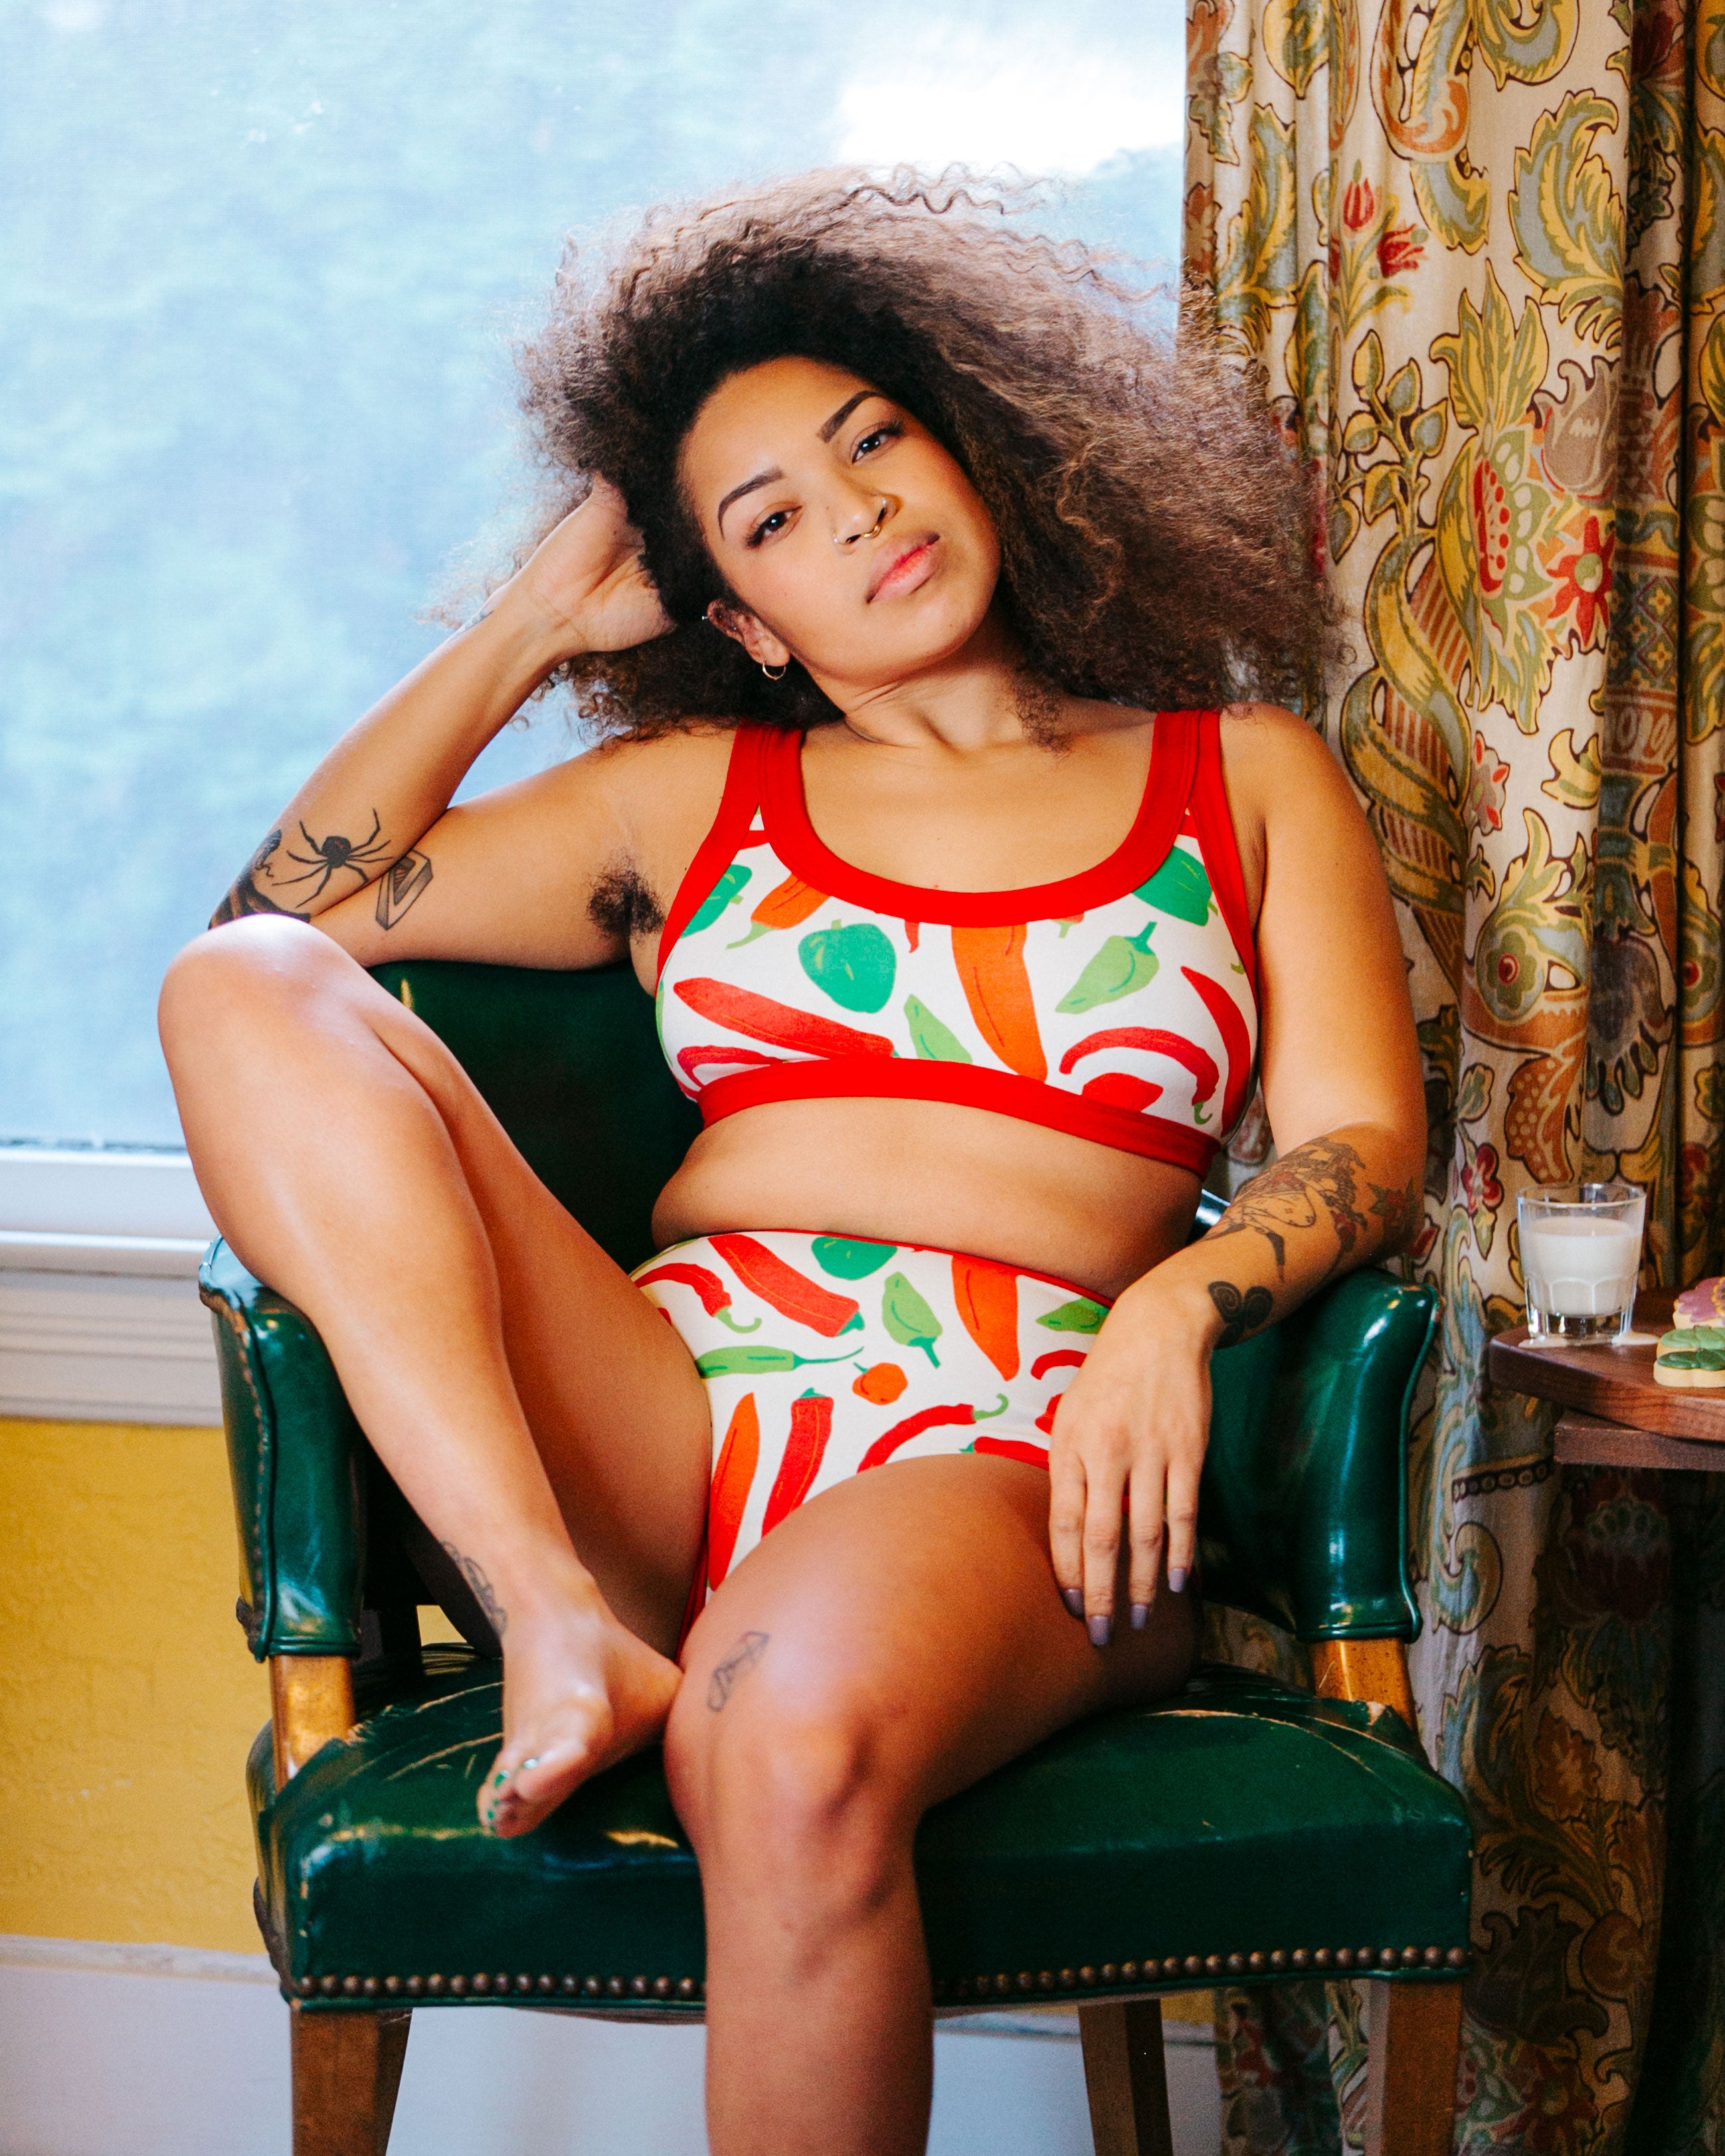 Model sitting in a chair at home wearing Thunderpants organic cotton Bralette and Sky Rise style underwear in our Hot Pants print: various green, orange, and red peppers printed on Vanilla with red binding.